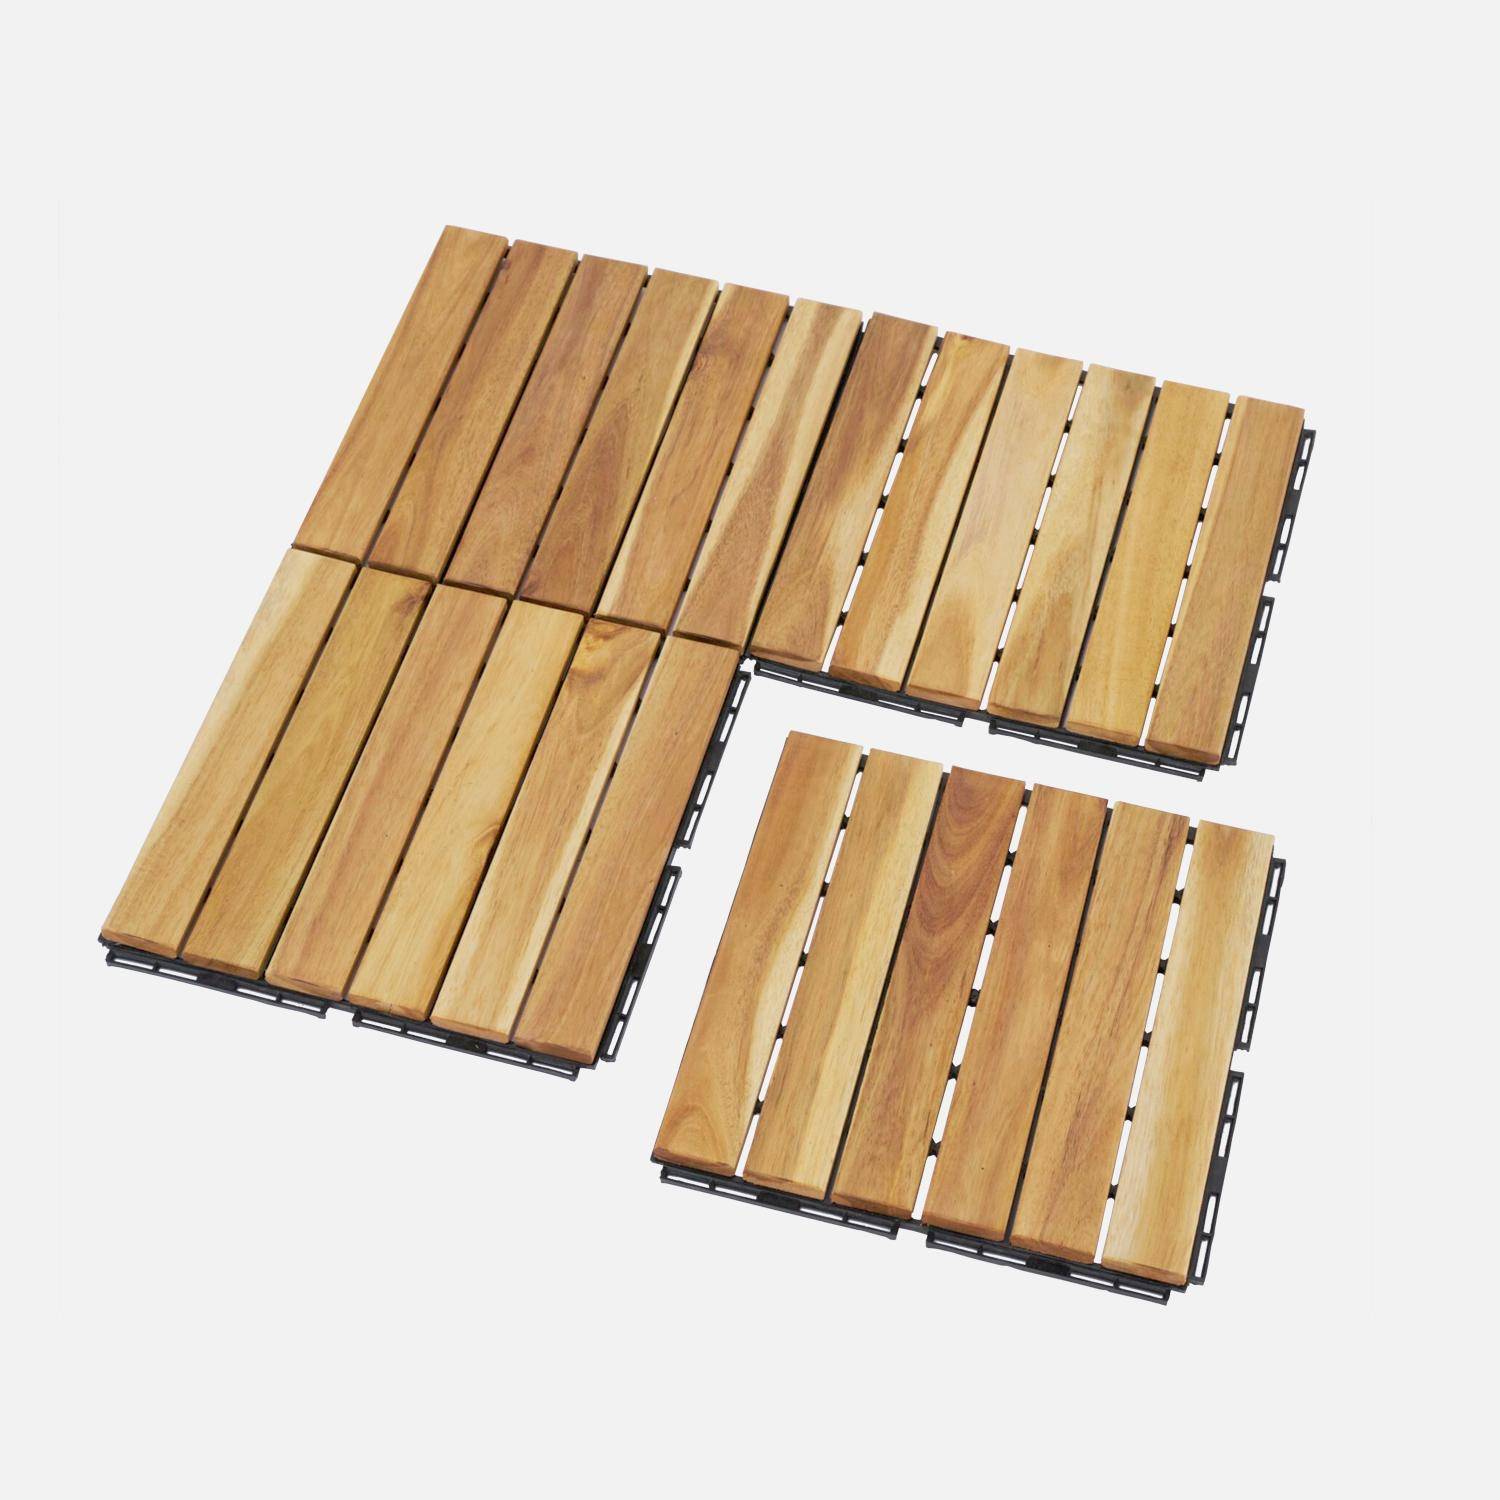 Pack of 10 acacia wood decking slabs 30x30cm, linear pattern, slats, clip-on Photo3